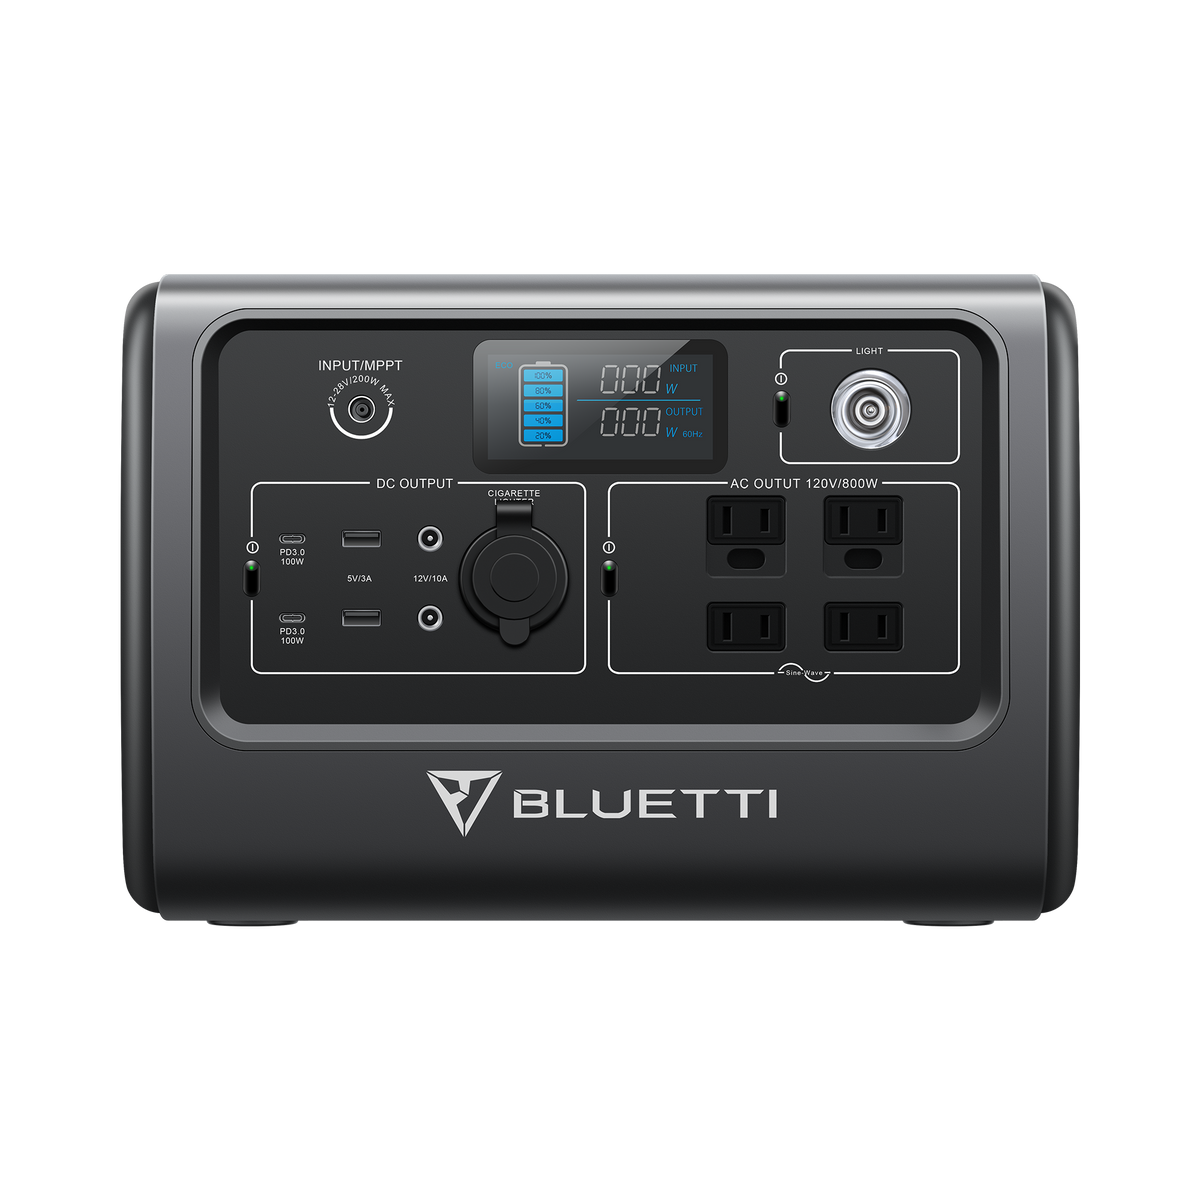 BLUETTI EB70 Portable Power Station with 200W Solar Panel, 716Wh700W Solar  Generator With 4 110V AC Outlets, Battery Backup for Camping Outdoor RV